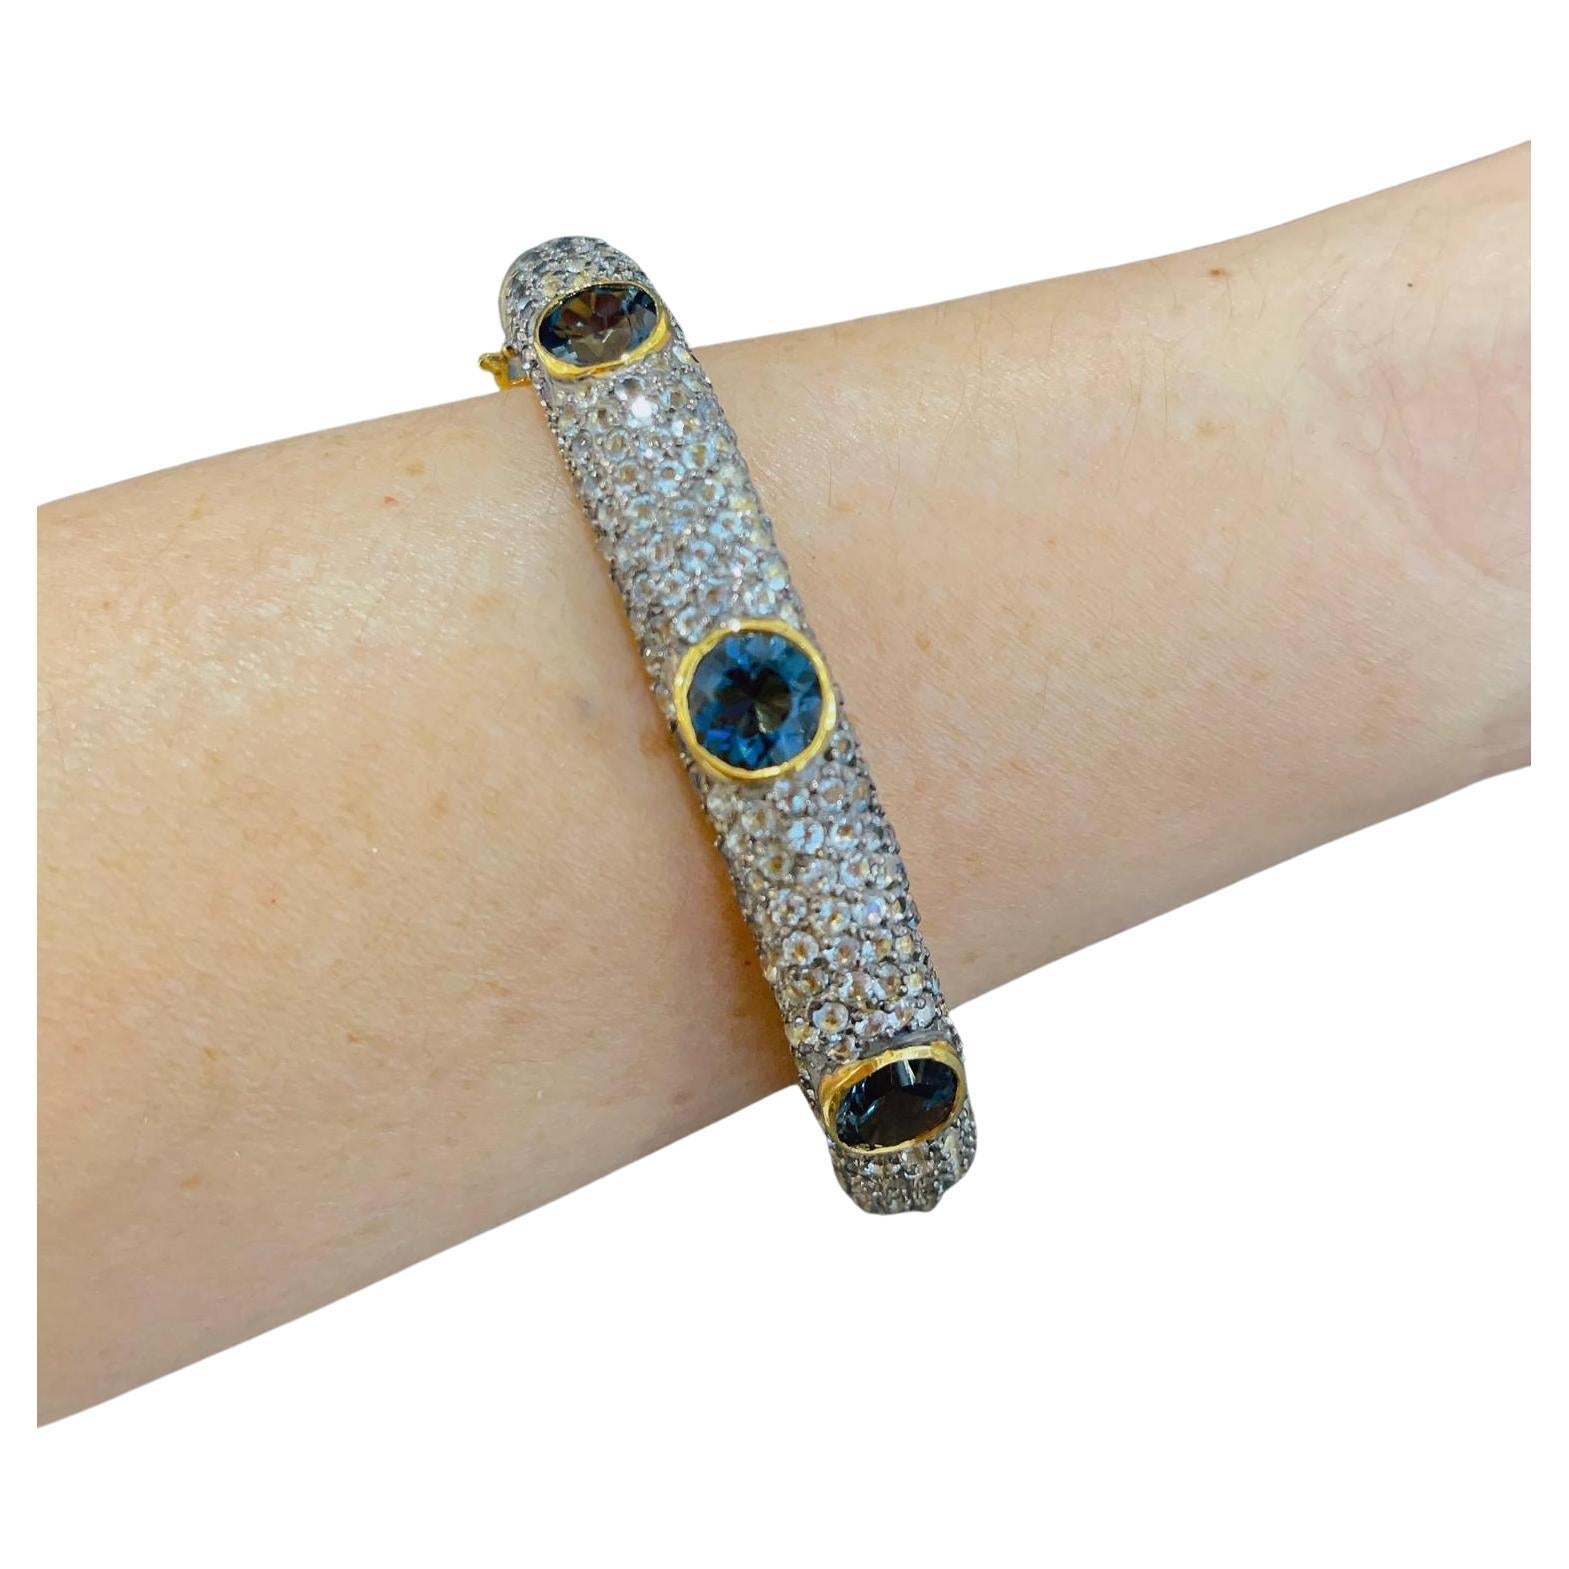 Bochic “Capri” London Topaz & White Zircon Bangle Set In 22K Gold & Silver 
Bochic Multi Gem “Capri” Bangle
The bangle had 2.2 Inch internal dimension and fits an average 7 inch wrist size
It has an open and close clasp and a safety hook
The inside